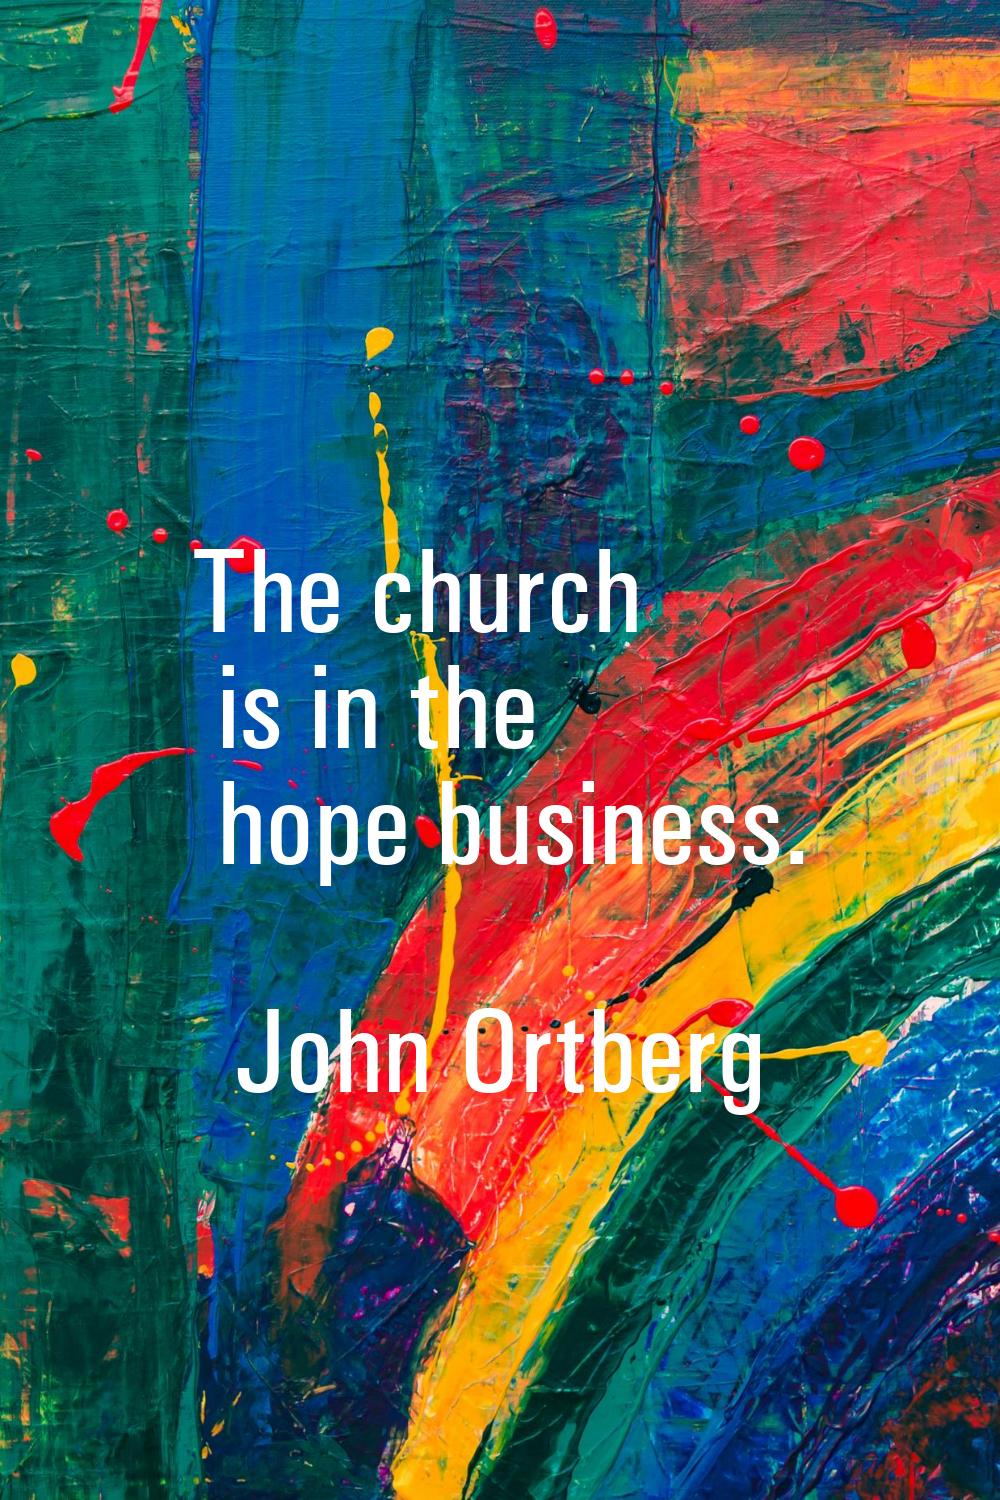 The church is in the hope business.